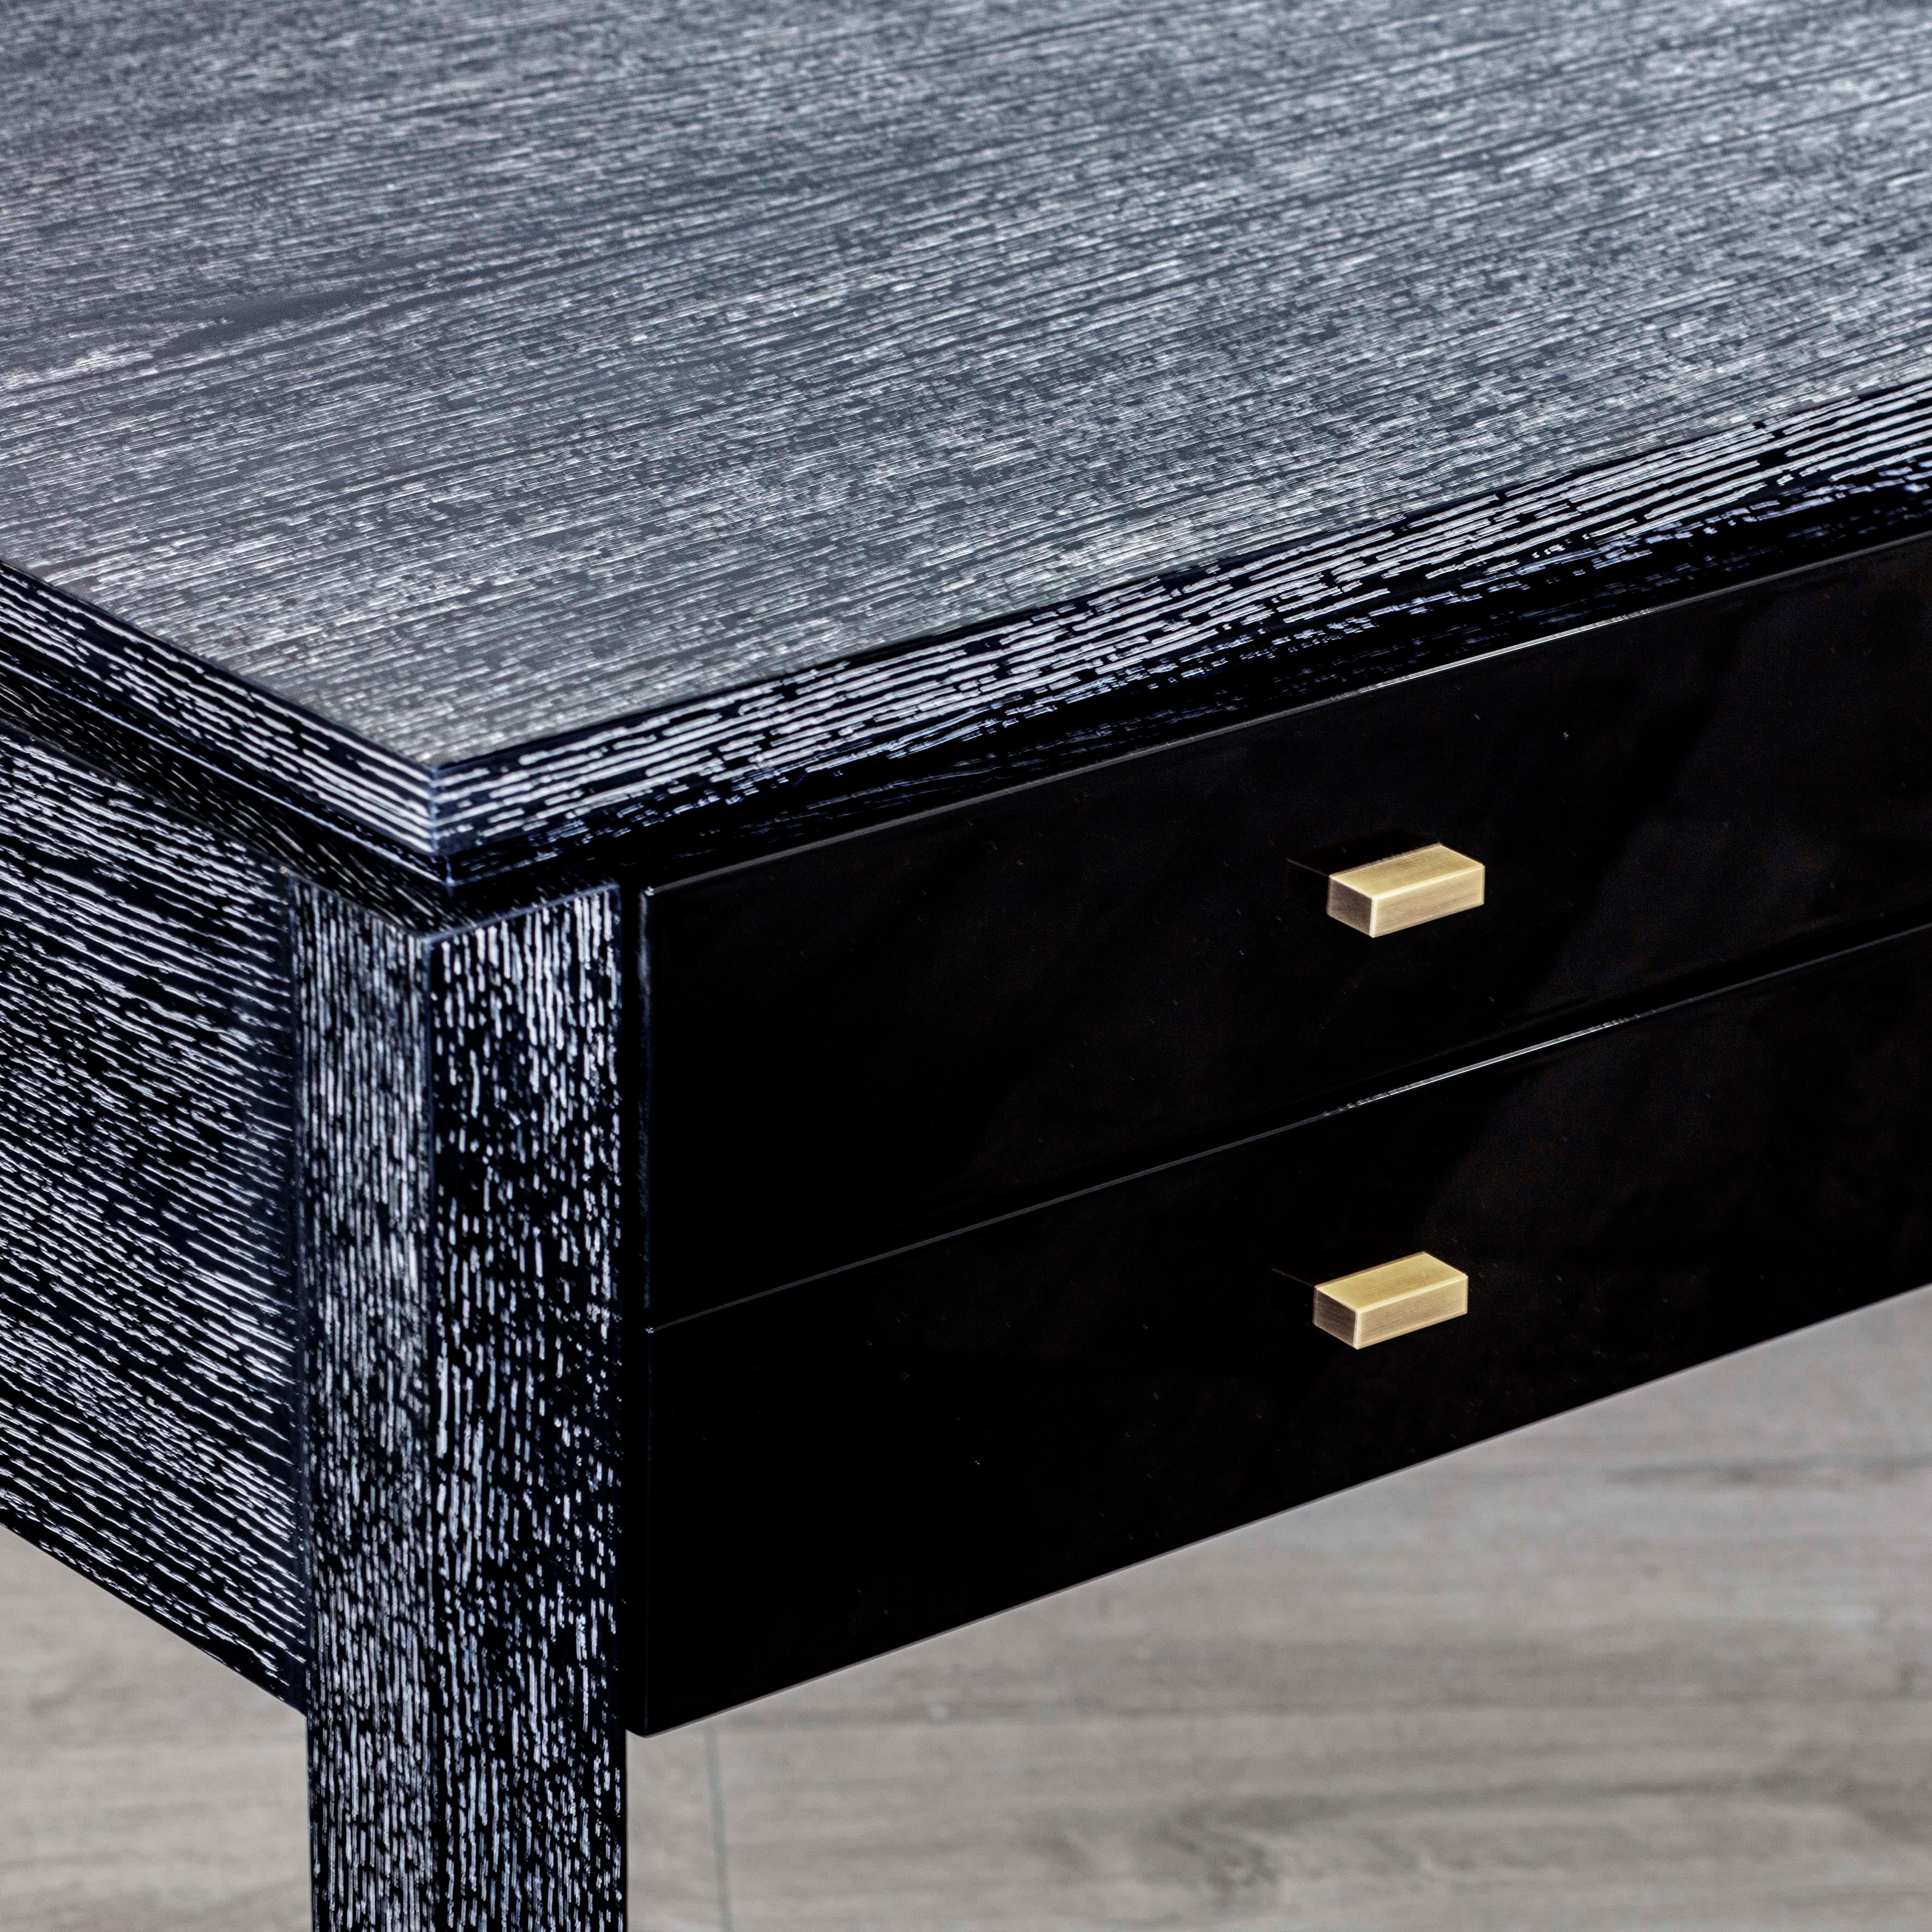 Anna desk is an imposing and elegant writing desk. With a high gloss lacquered body that contrasts with the brushed oak top and feet with lime finish. The delicate brass details add character and beauty to this piece.

Shown in black limed oak top